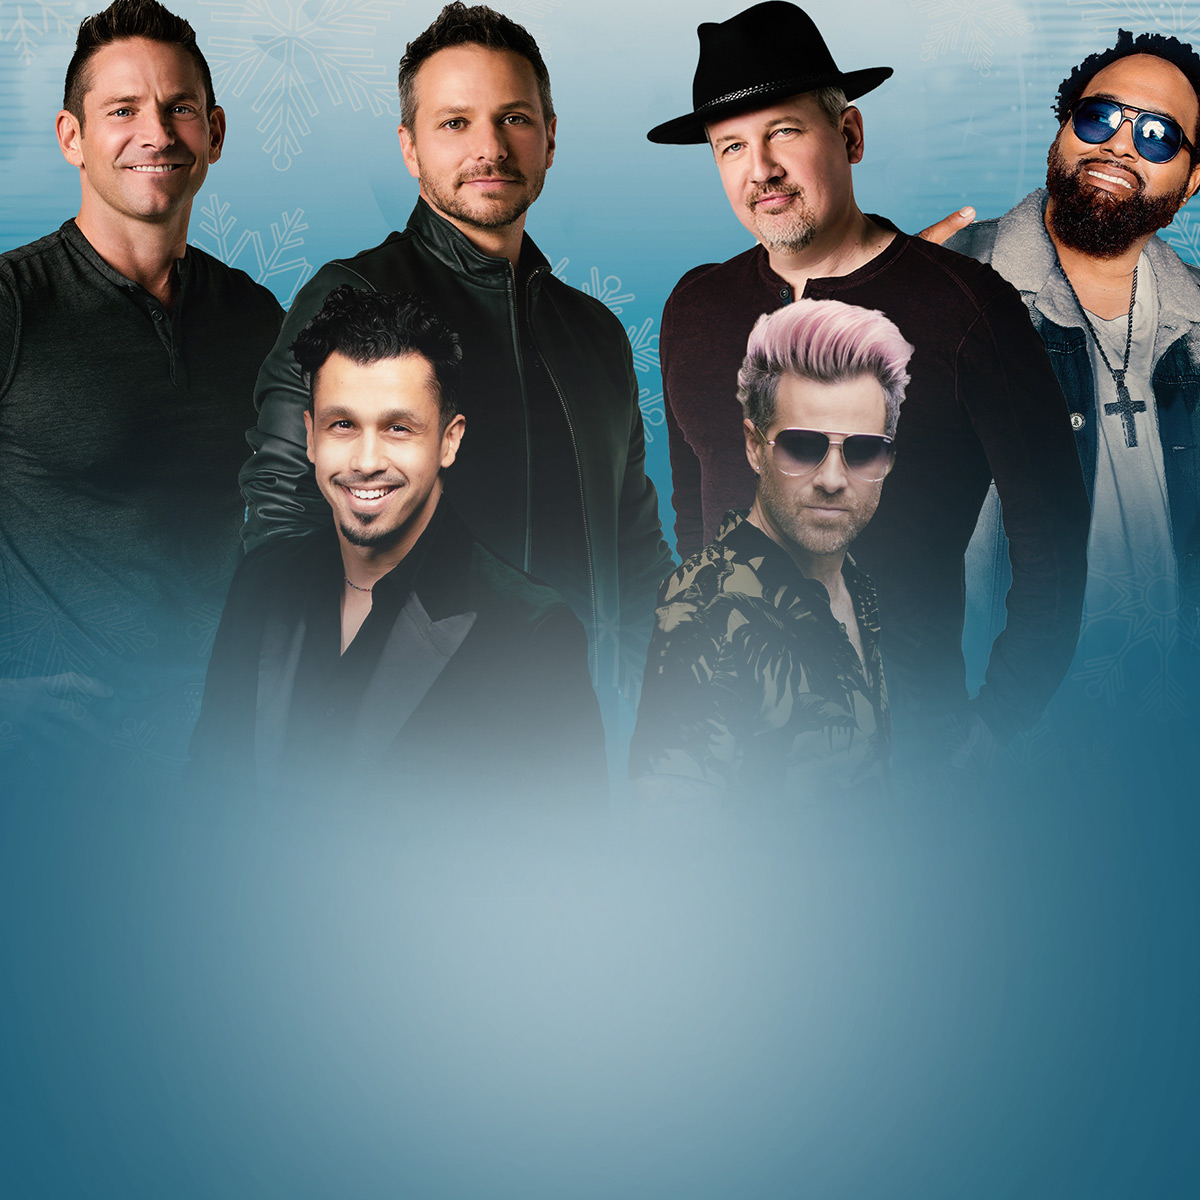 A Boy Band Christmas Featuring 98 Degrees, All-4-One, and O-Town